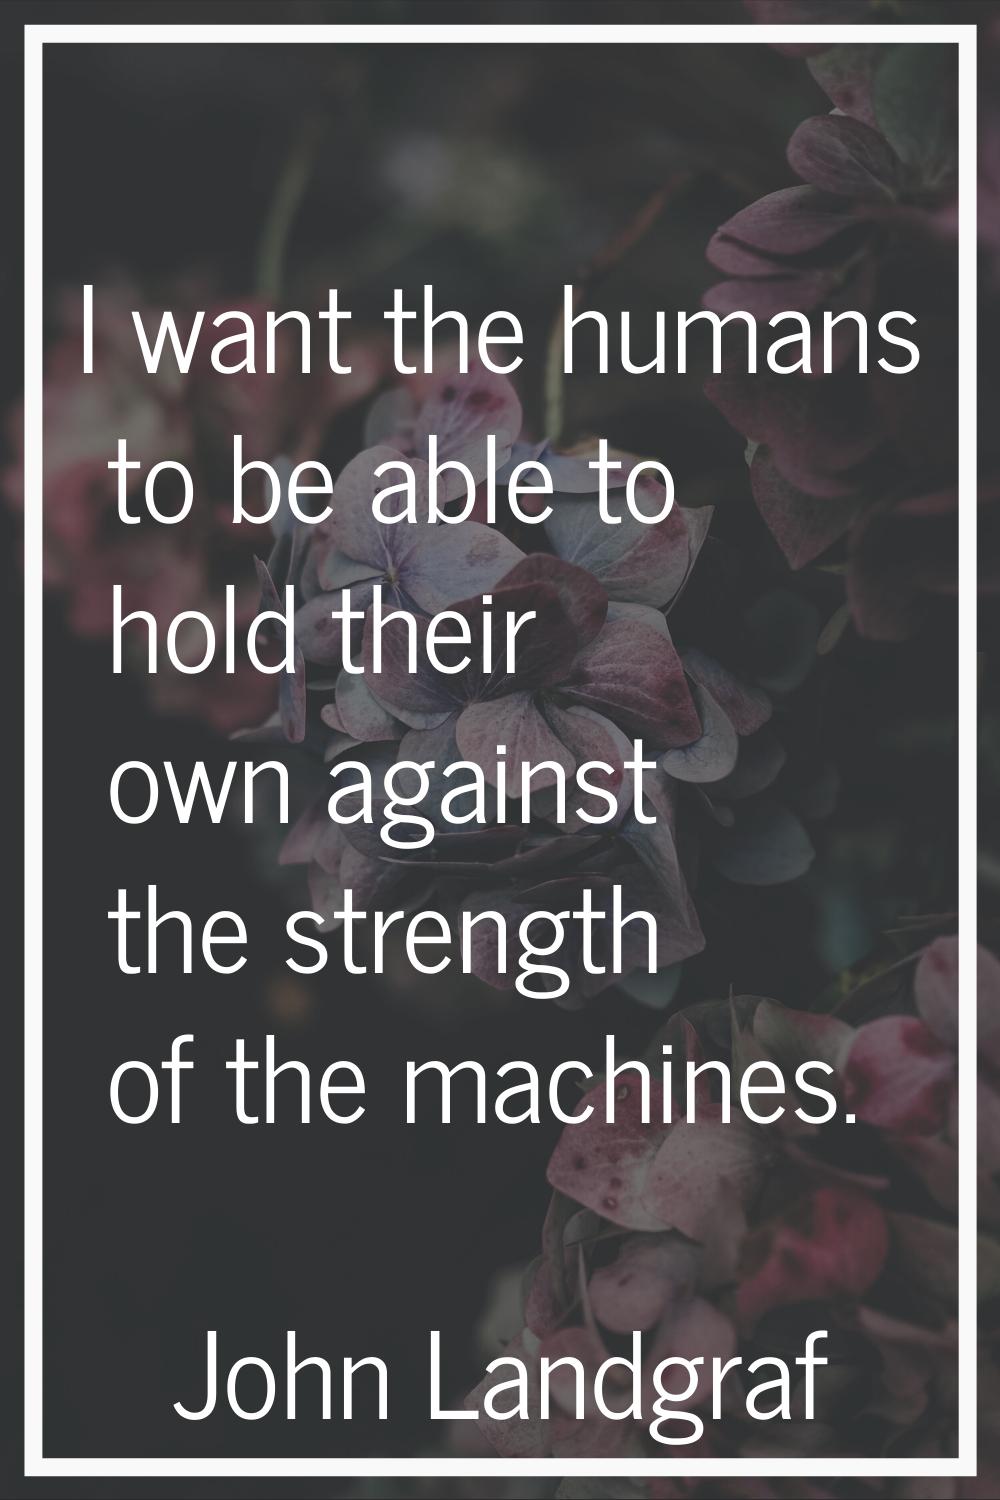 I want the humans to be able to hold their own against the strength of the machines.